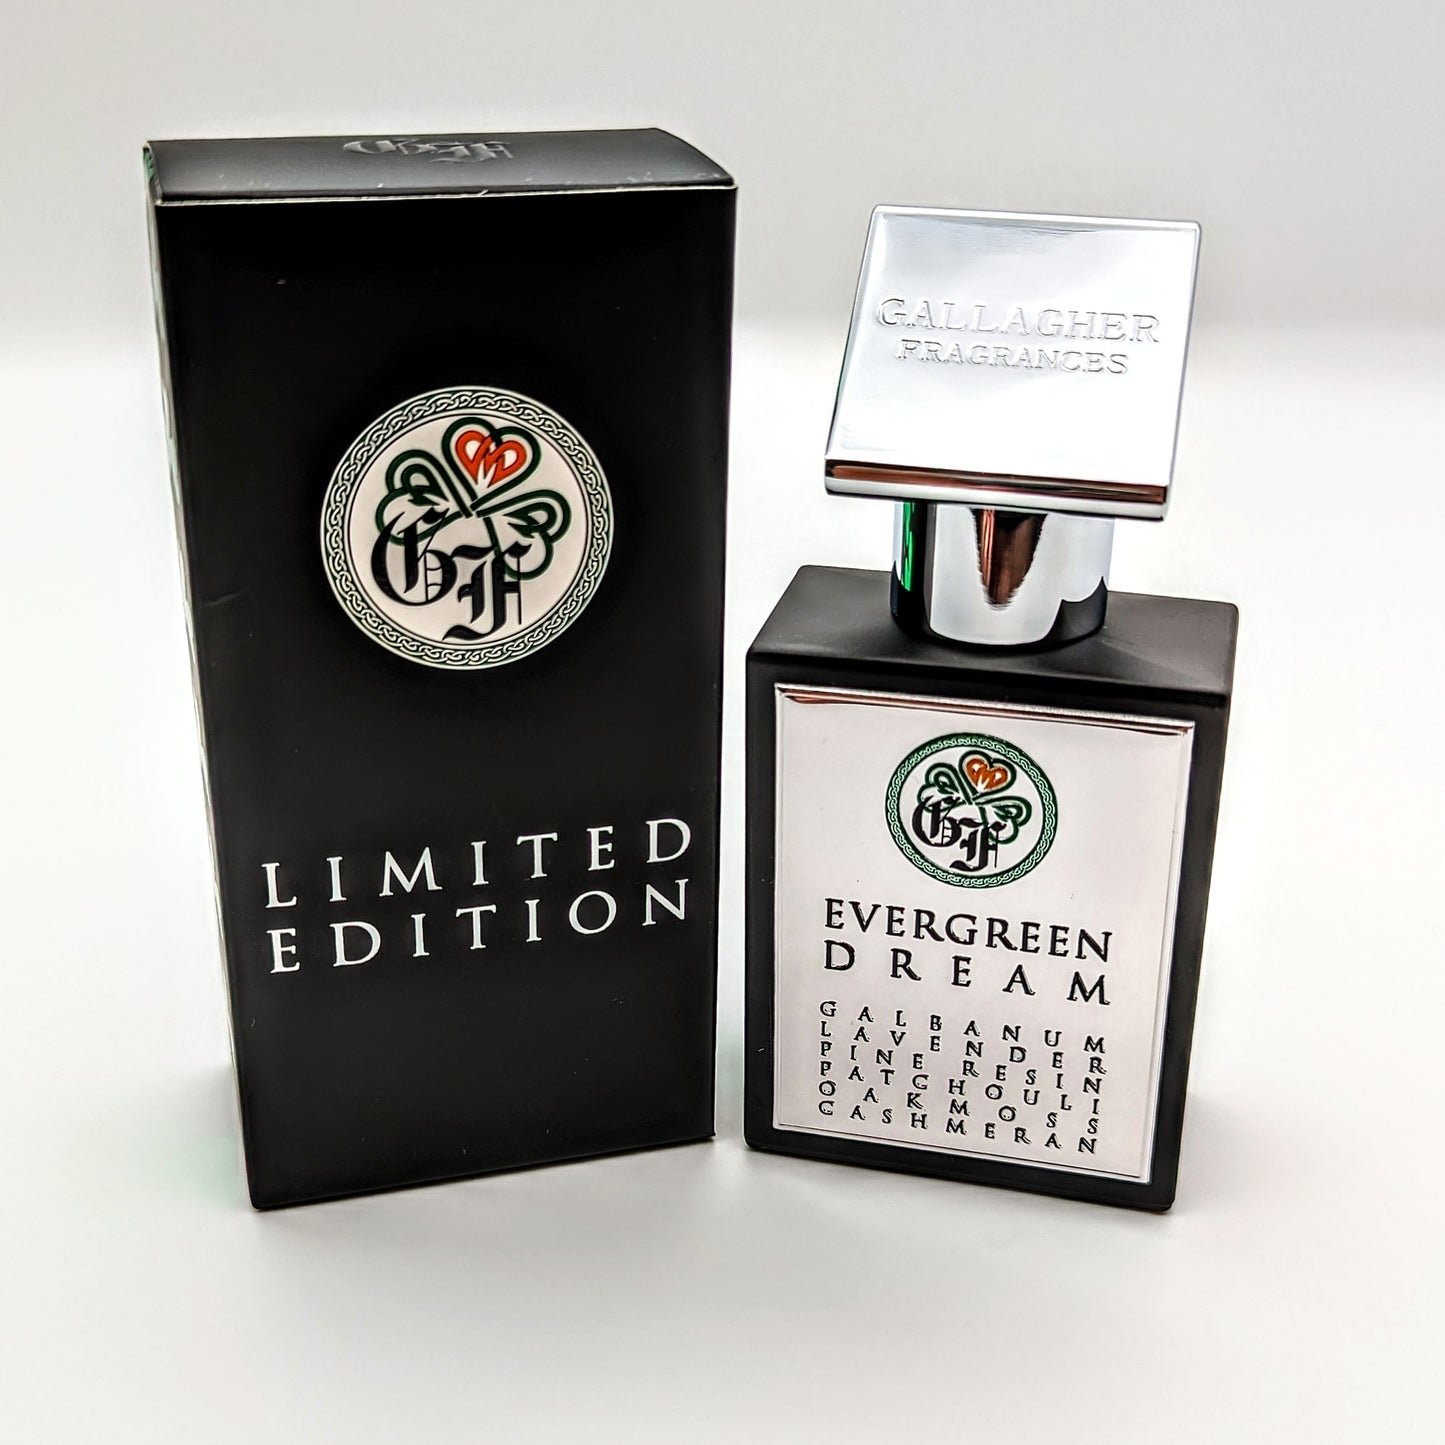 Evergreen Dream- Limited Edition